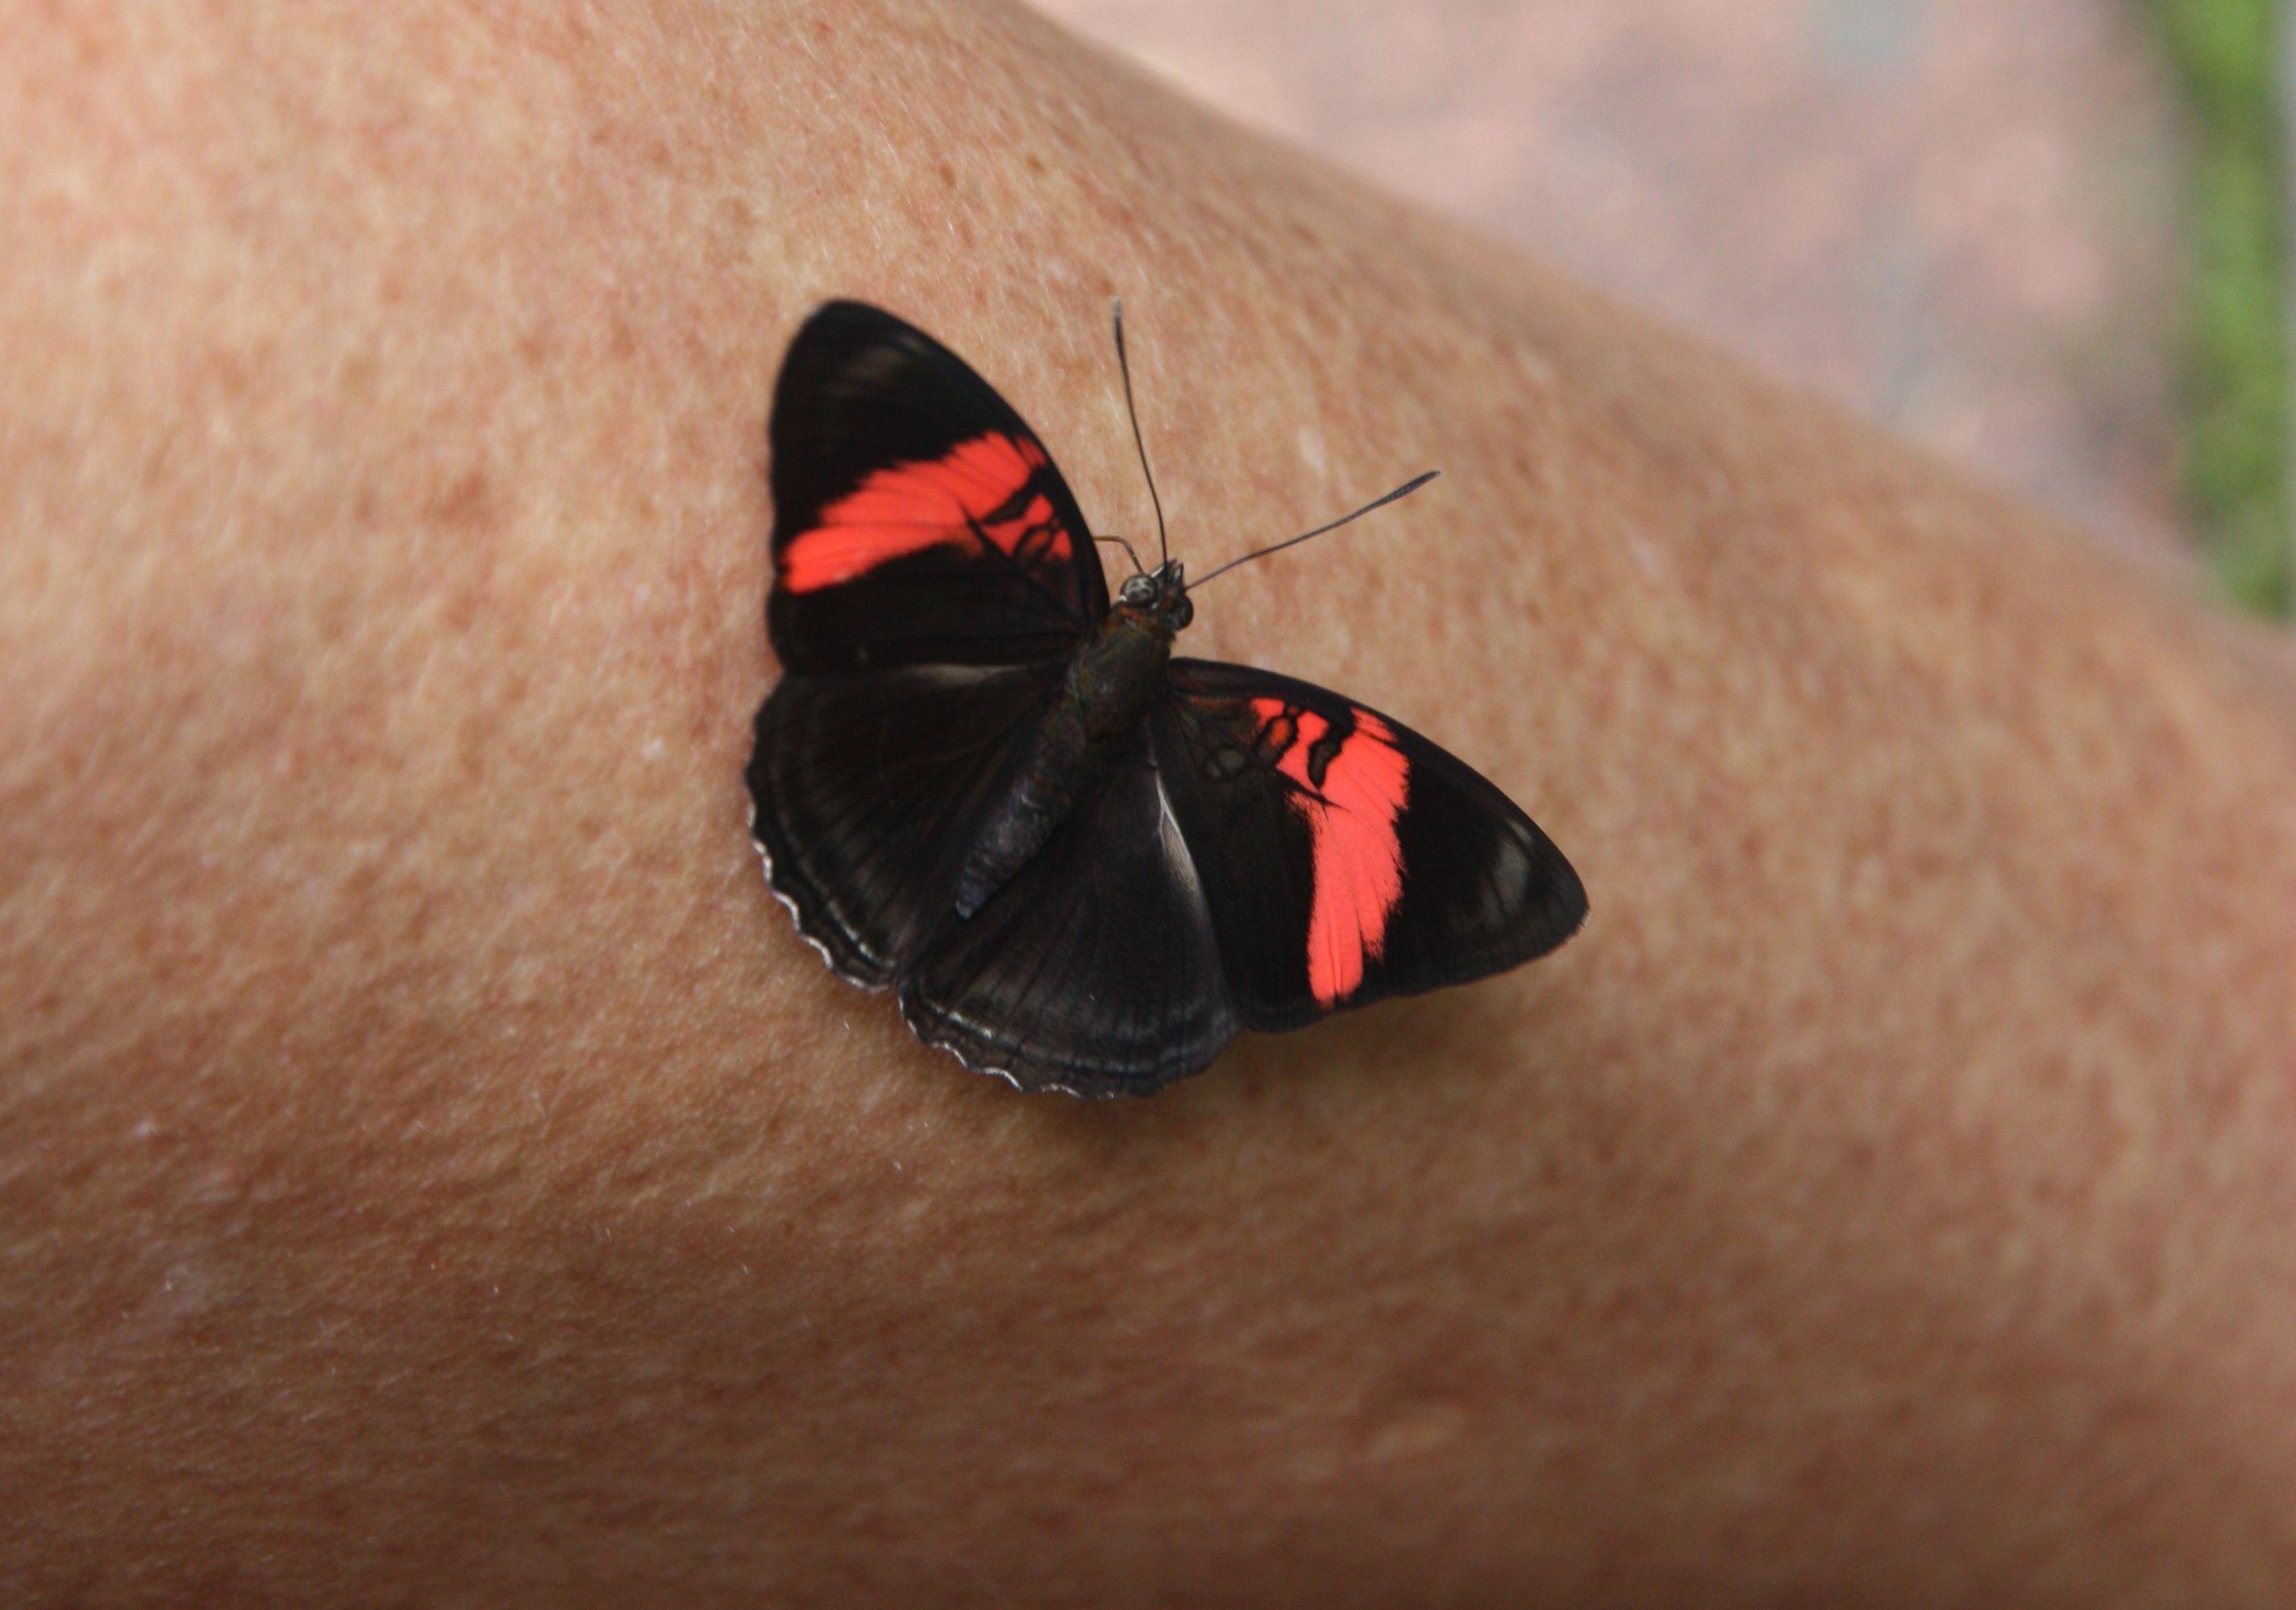 Black and Red Butterfly Logo - Black and red butterfly, Iguazu Falls. Where to next?